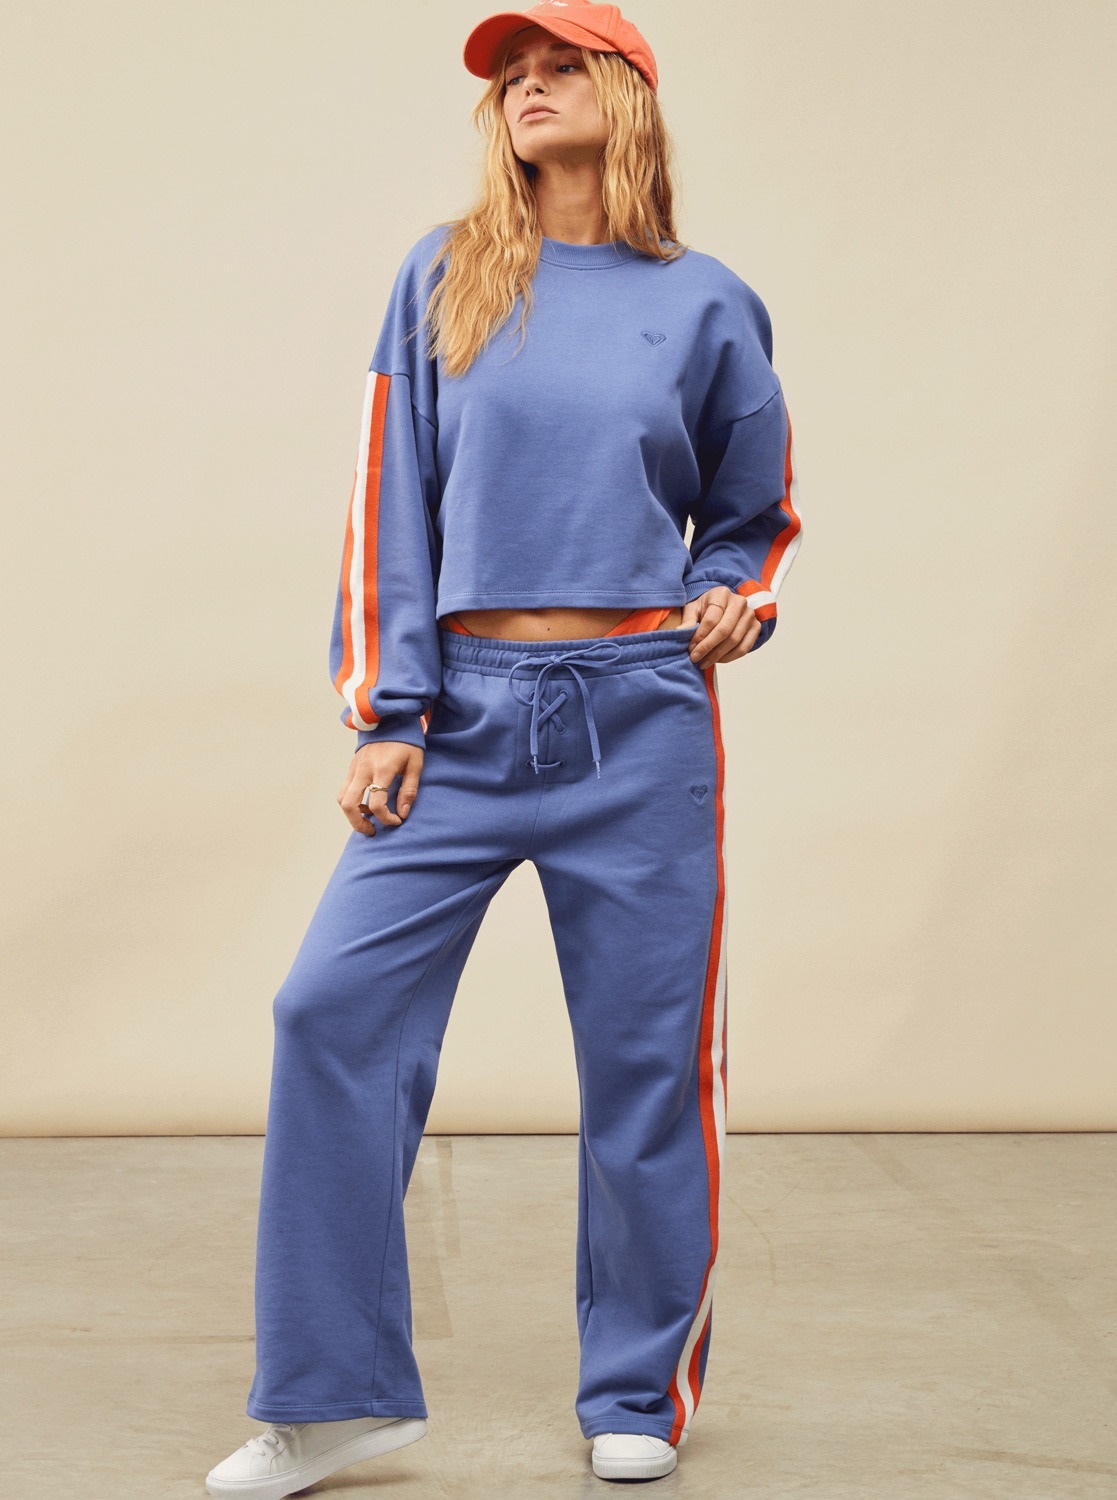 Tracksuit At The Airport?  Sporty And Comfortable Looks By Roxy Inspired By Tamara Falcó.